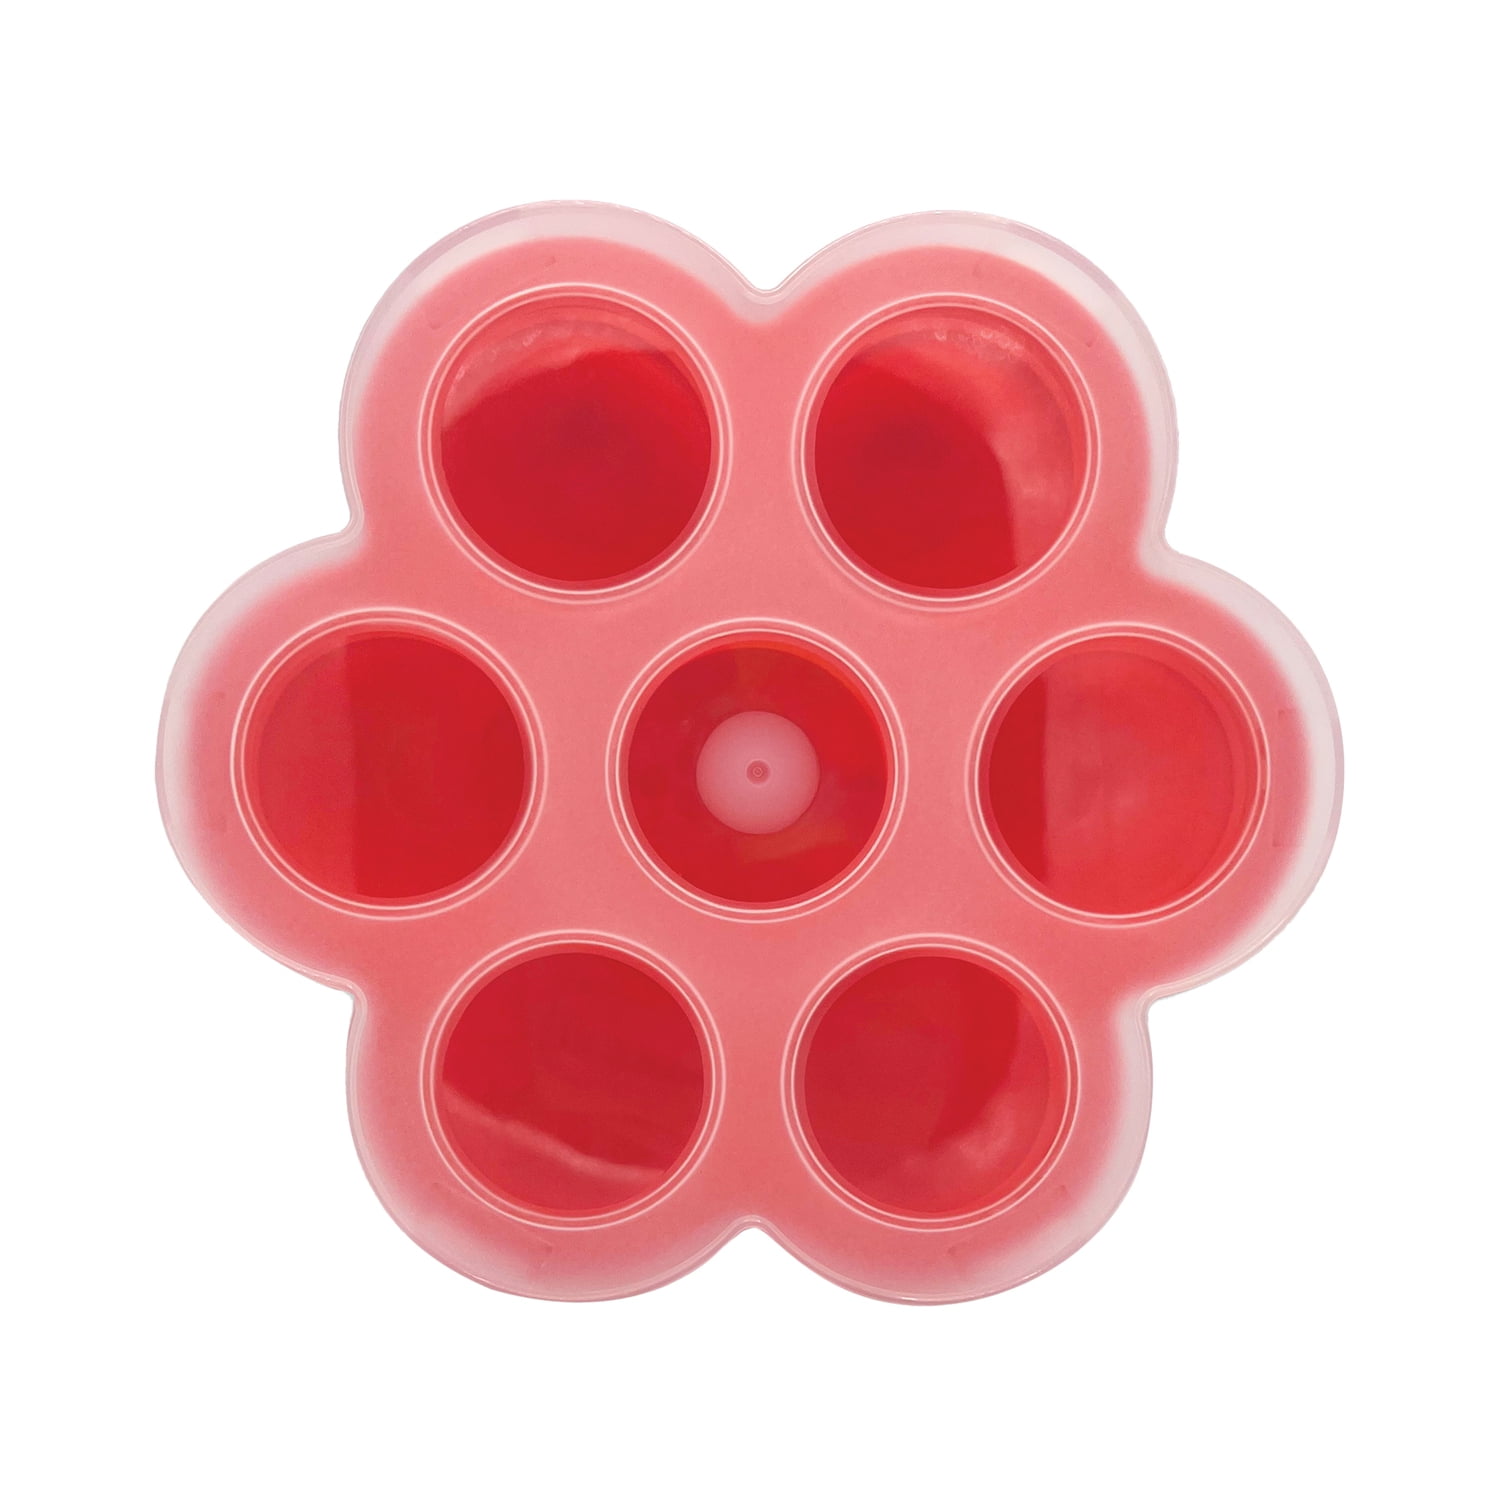 MainStays Silicone Egg Bites Cooking Mold with Lid